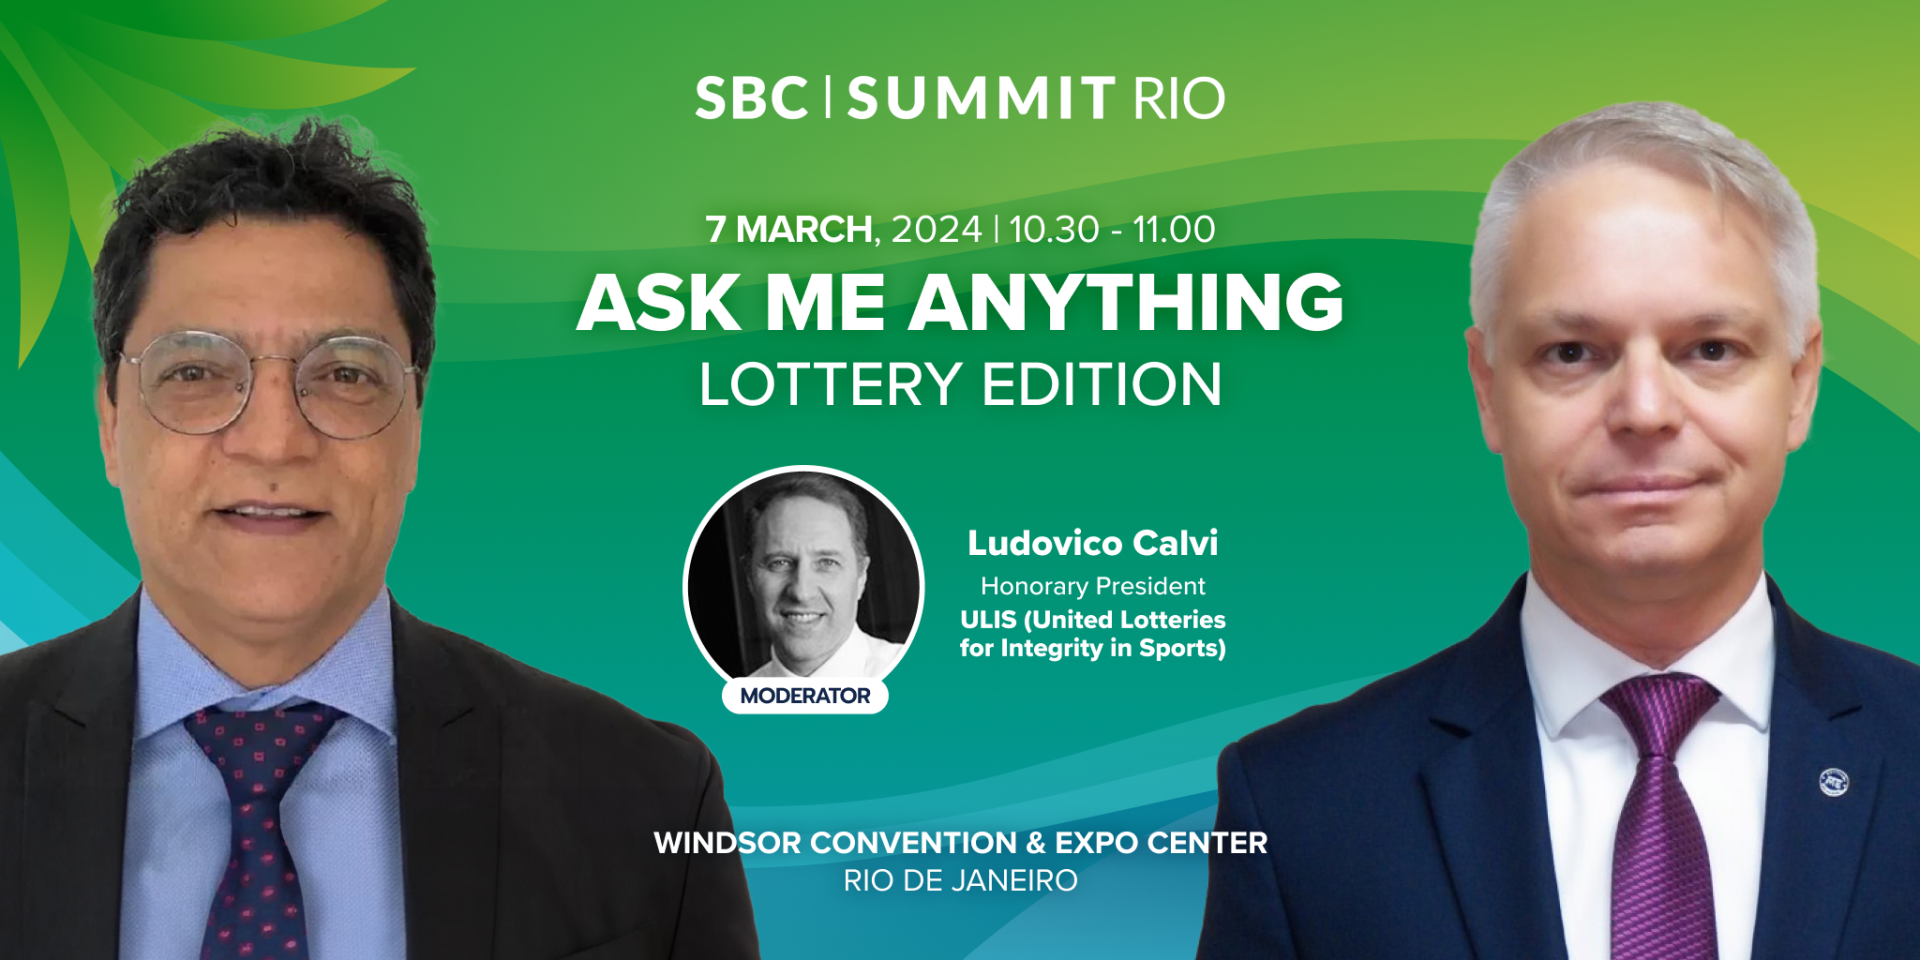 Leadership Duo with Expertise in Brazil to Open SBC Summit Rio